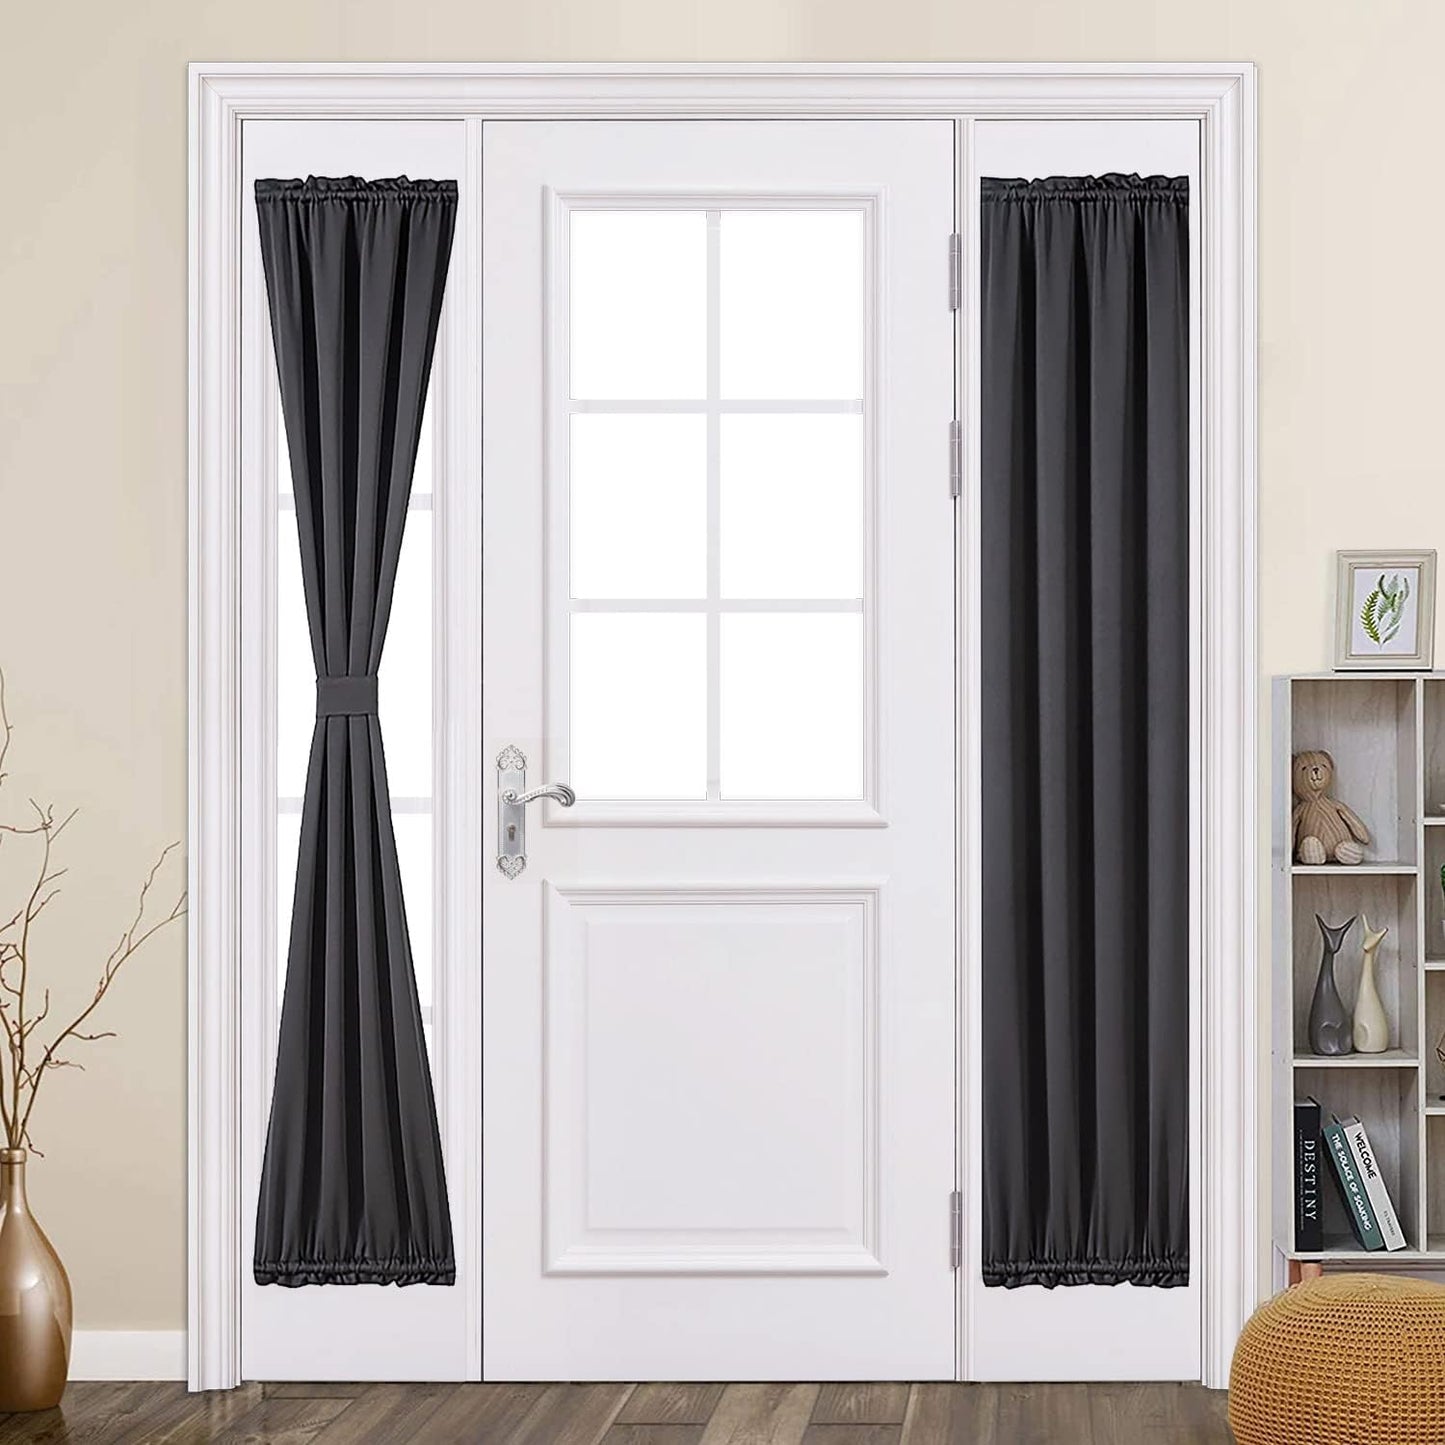 MIULEE Sidelight French Door Blackout Curtain Thermal Insulated Drapes Light Blocking Window Treatment Curtain for Narrow Glass Door Rod Pocket with Tieback 25 Inch by 72 Inch Black 1 Panel  MIULEE Black 72.00" X 25.00" 